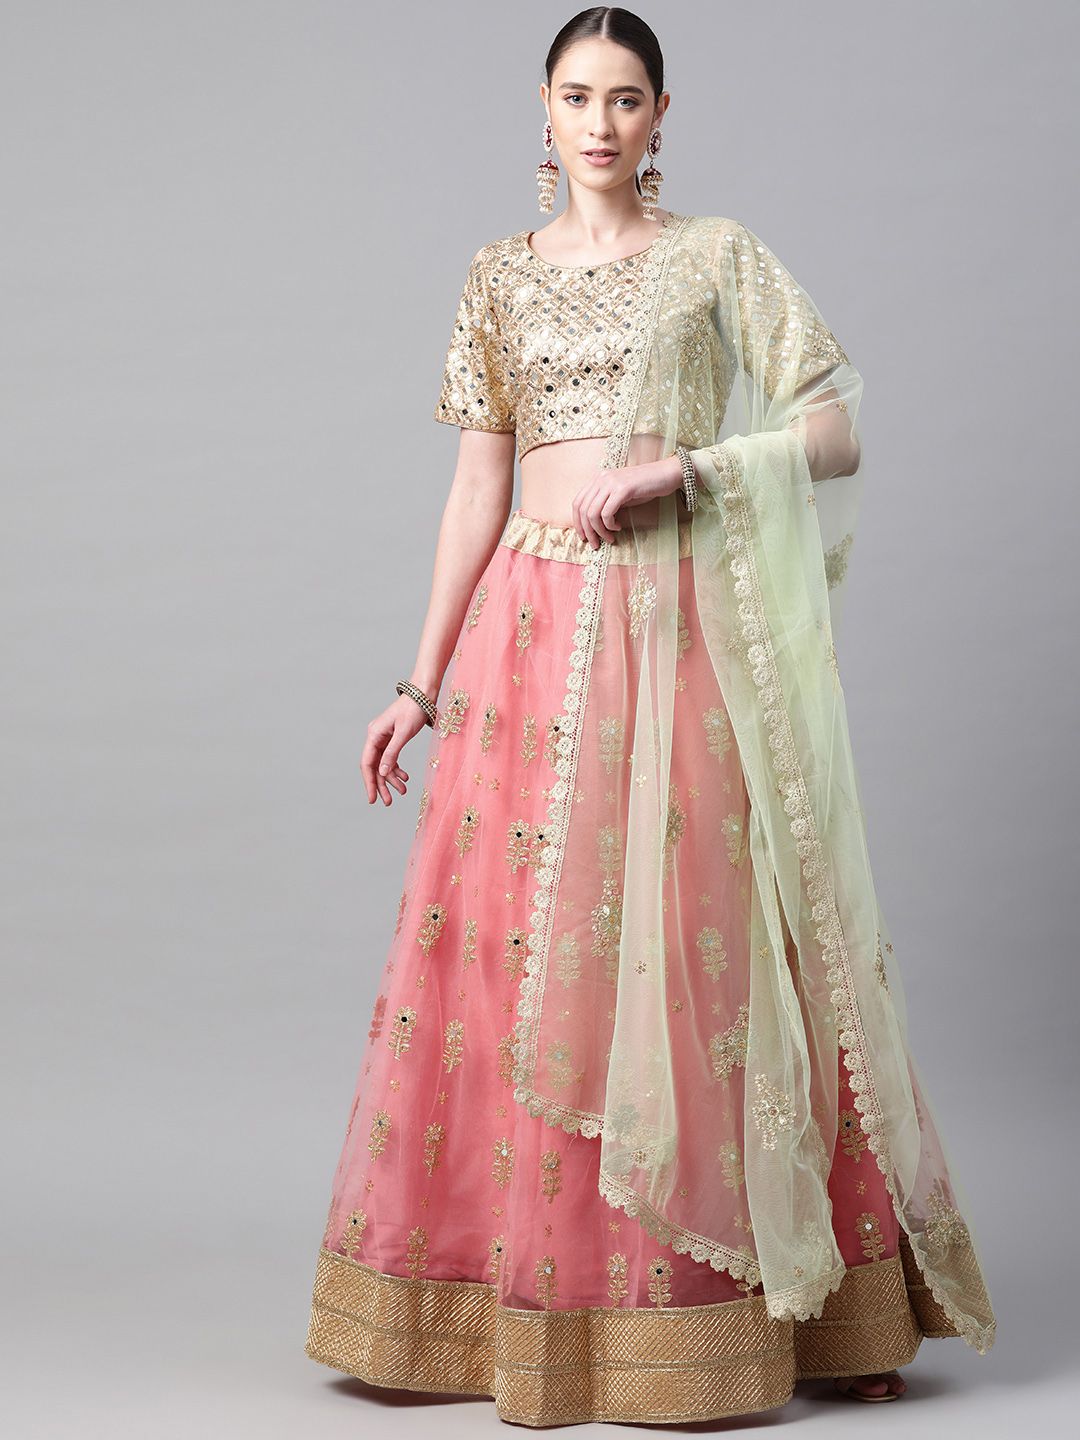 Readiprint Fashions Pink & Golden Embellished Semi-Stitched Lehenga & Blouse with Dupatta Price in India